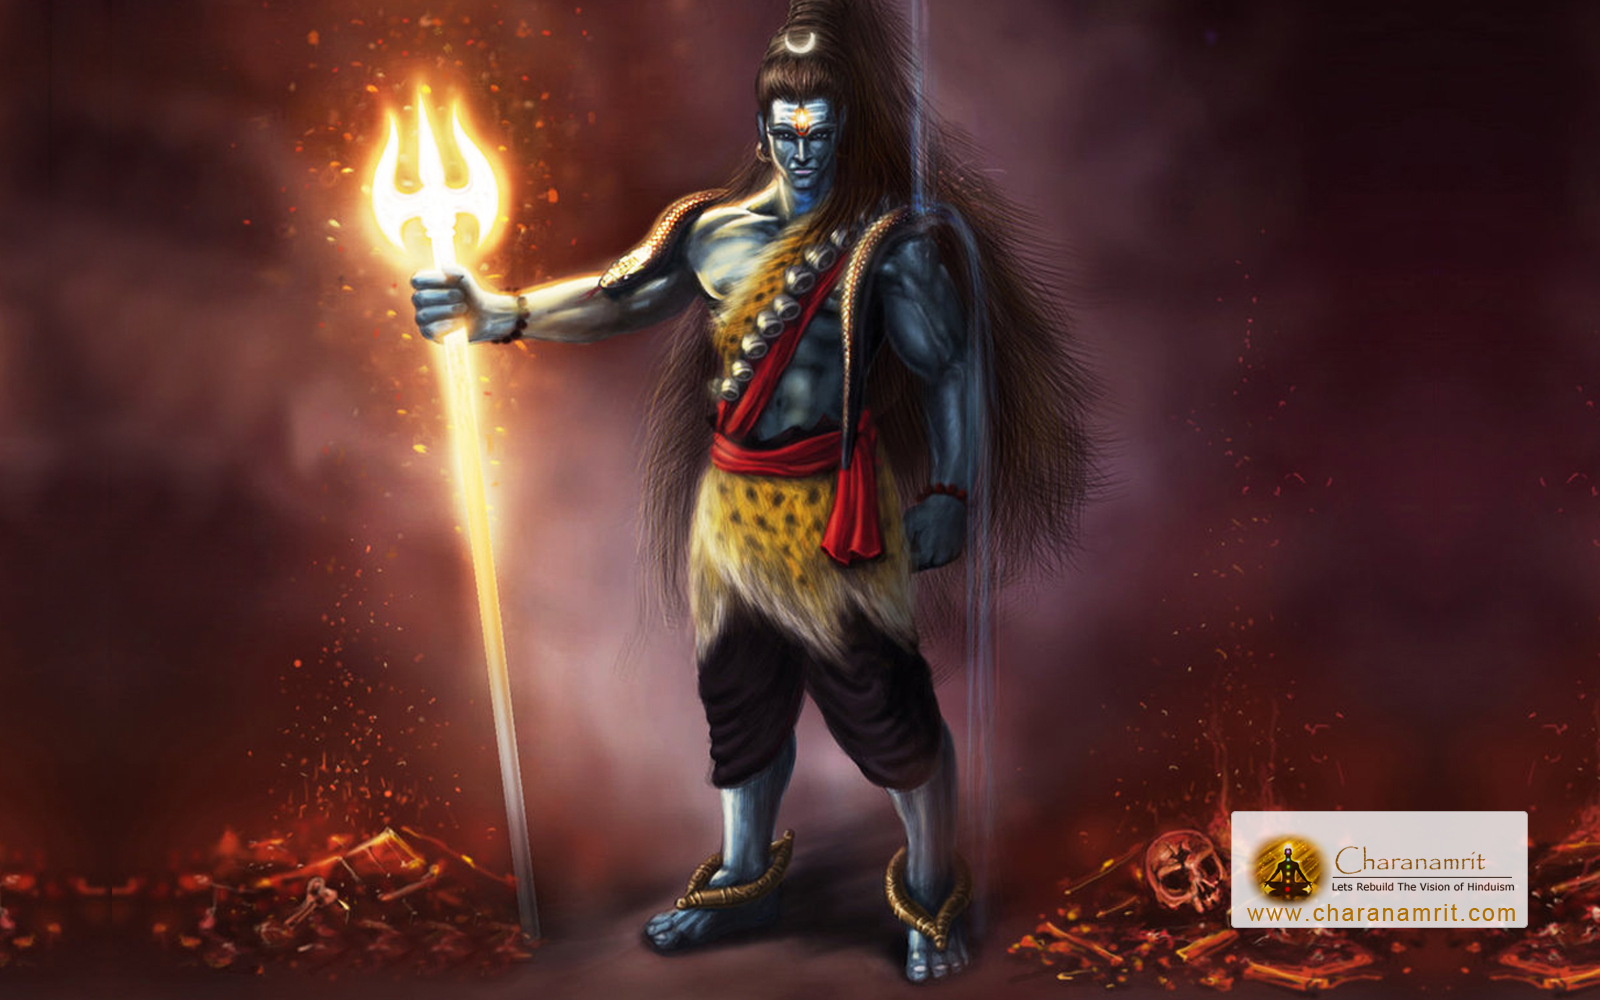 Lord Shiva Angry Hd Wallpapers 1080p On Share Online   Lord Shiva